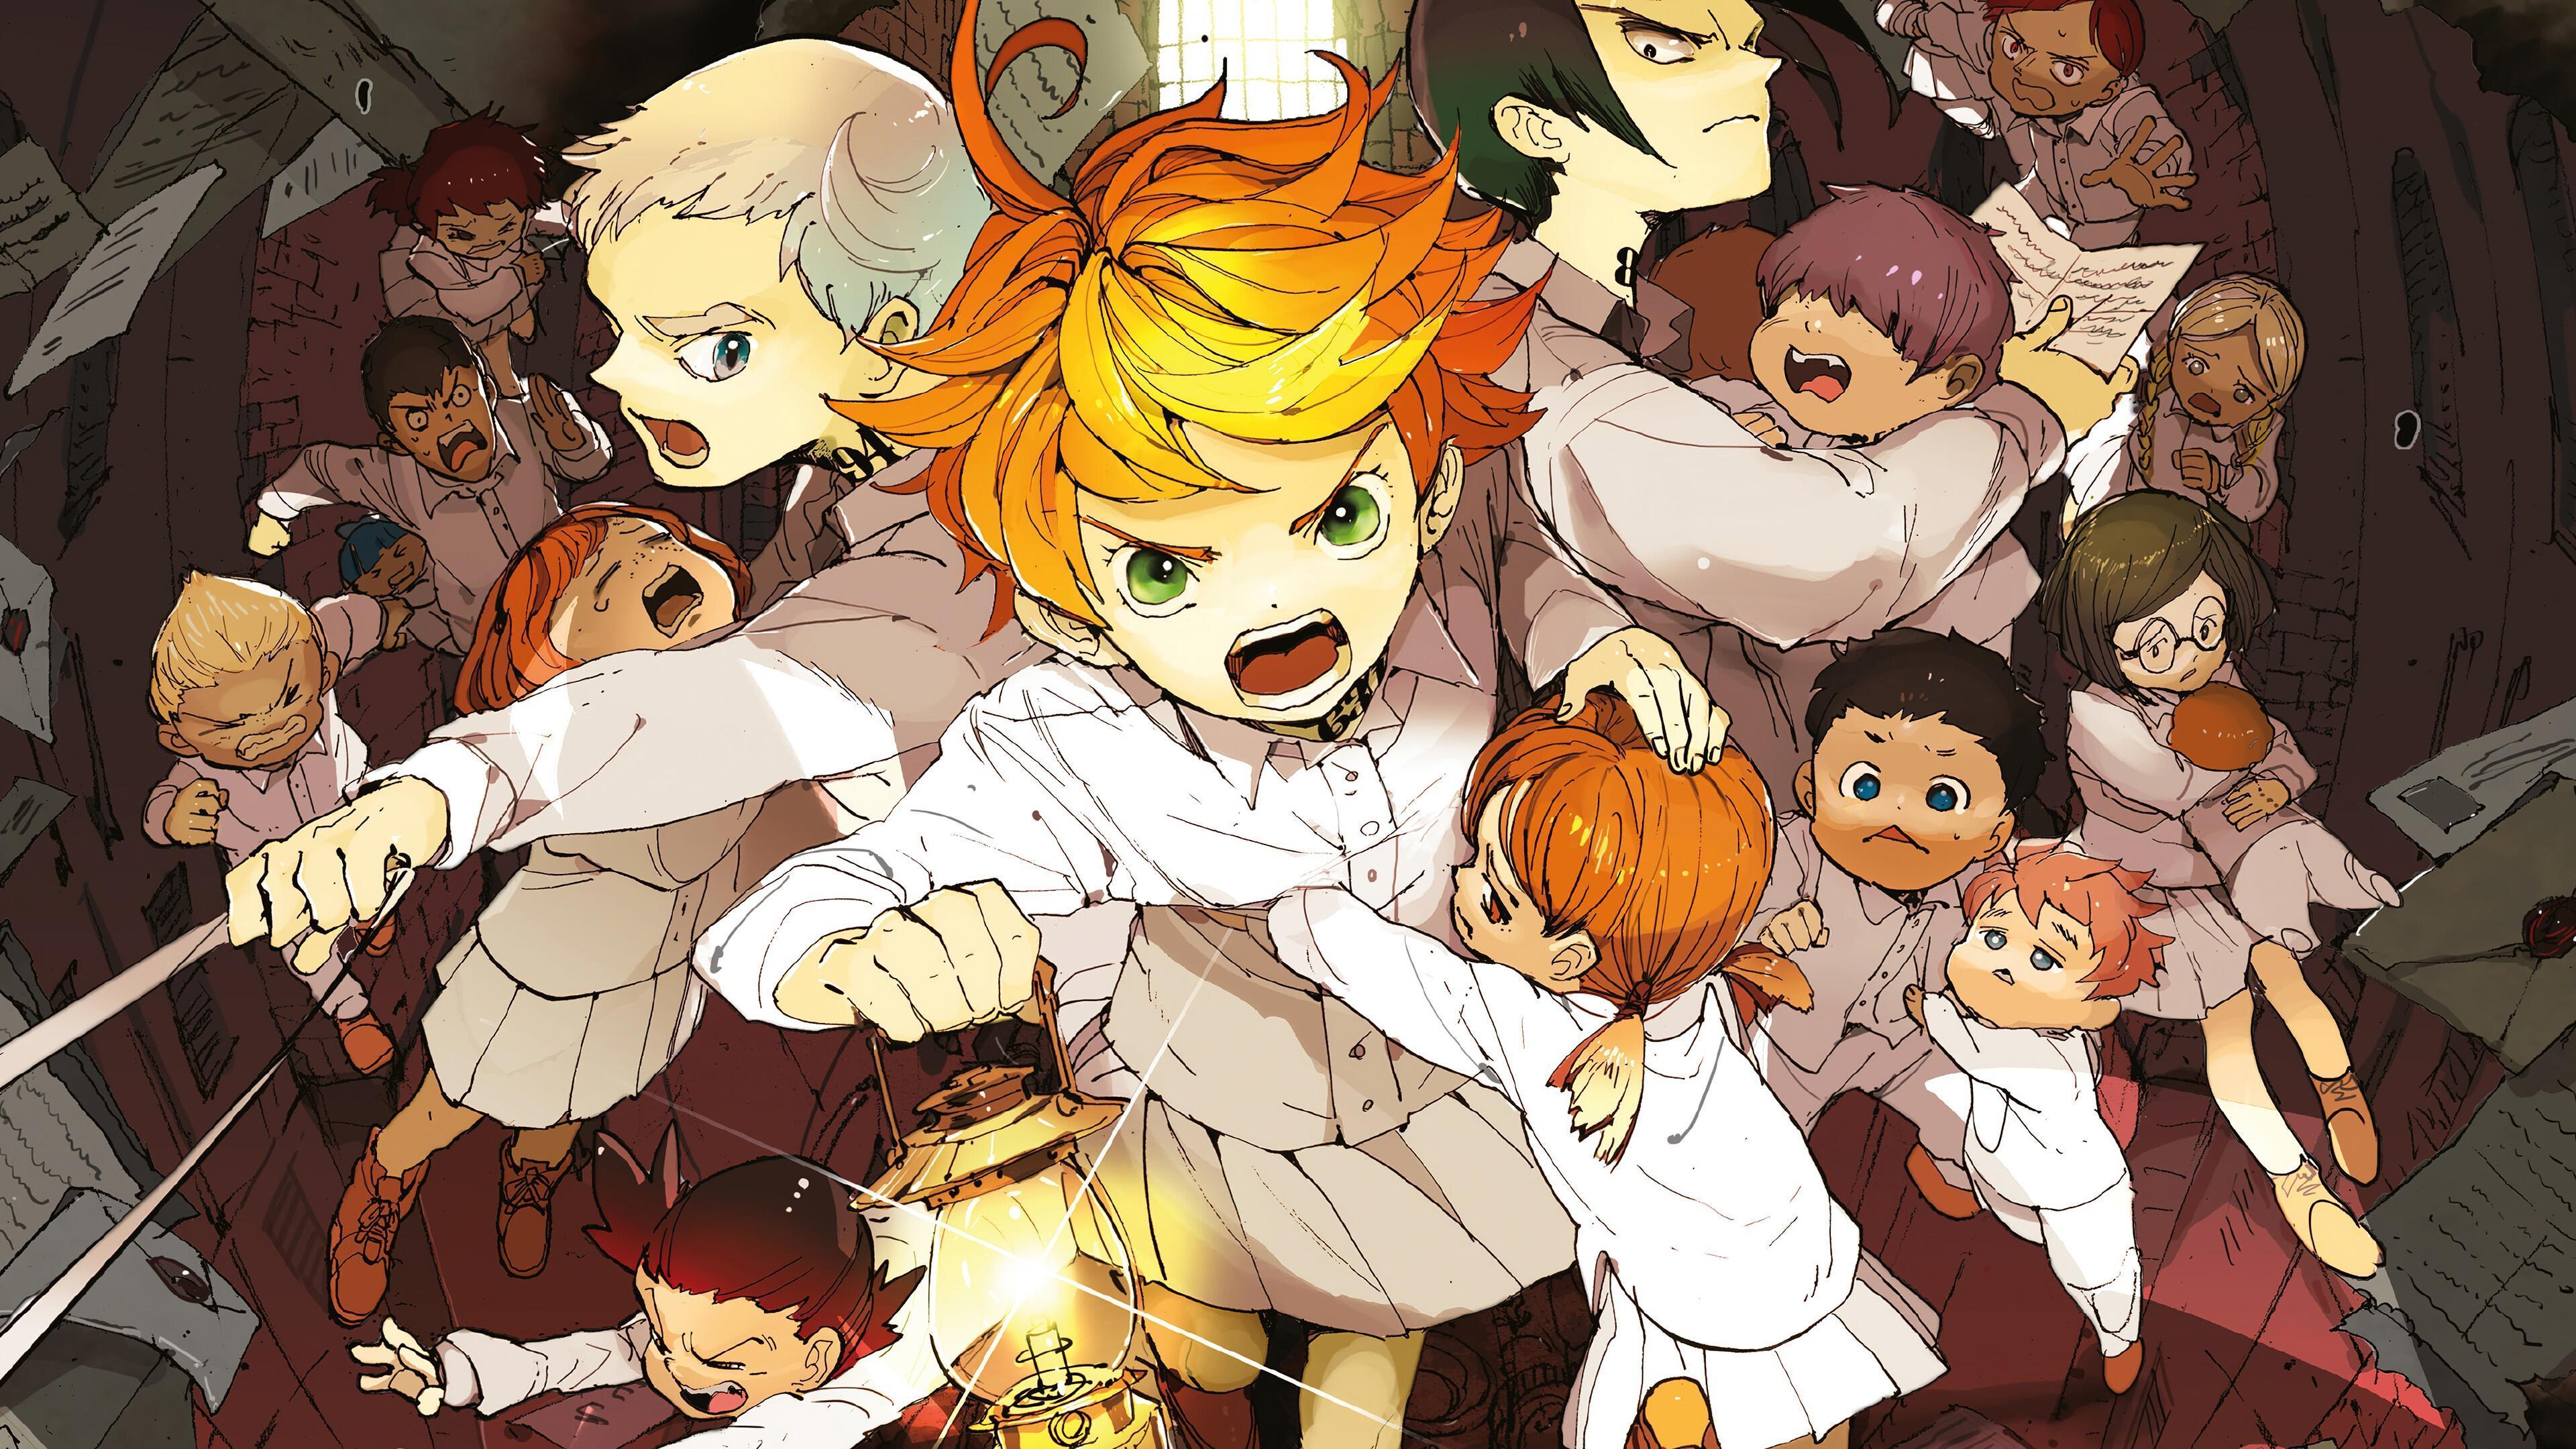 HD wallpaper, Hd, Emma, Norman, The Promised Neverland, Wallpaper, Ray, 4K